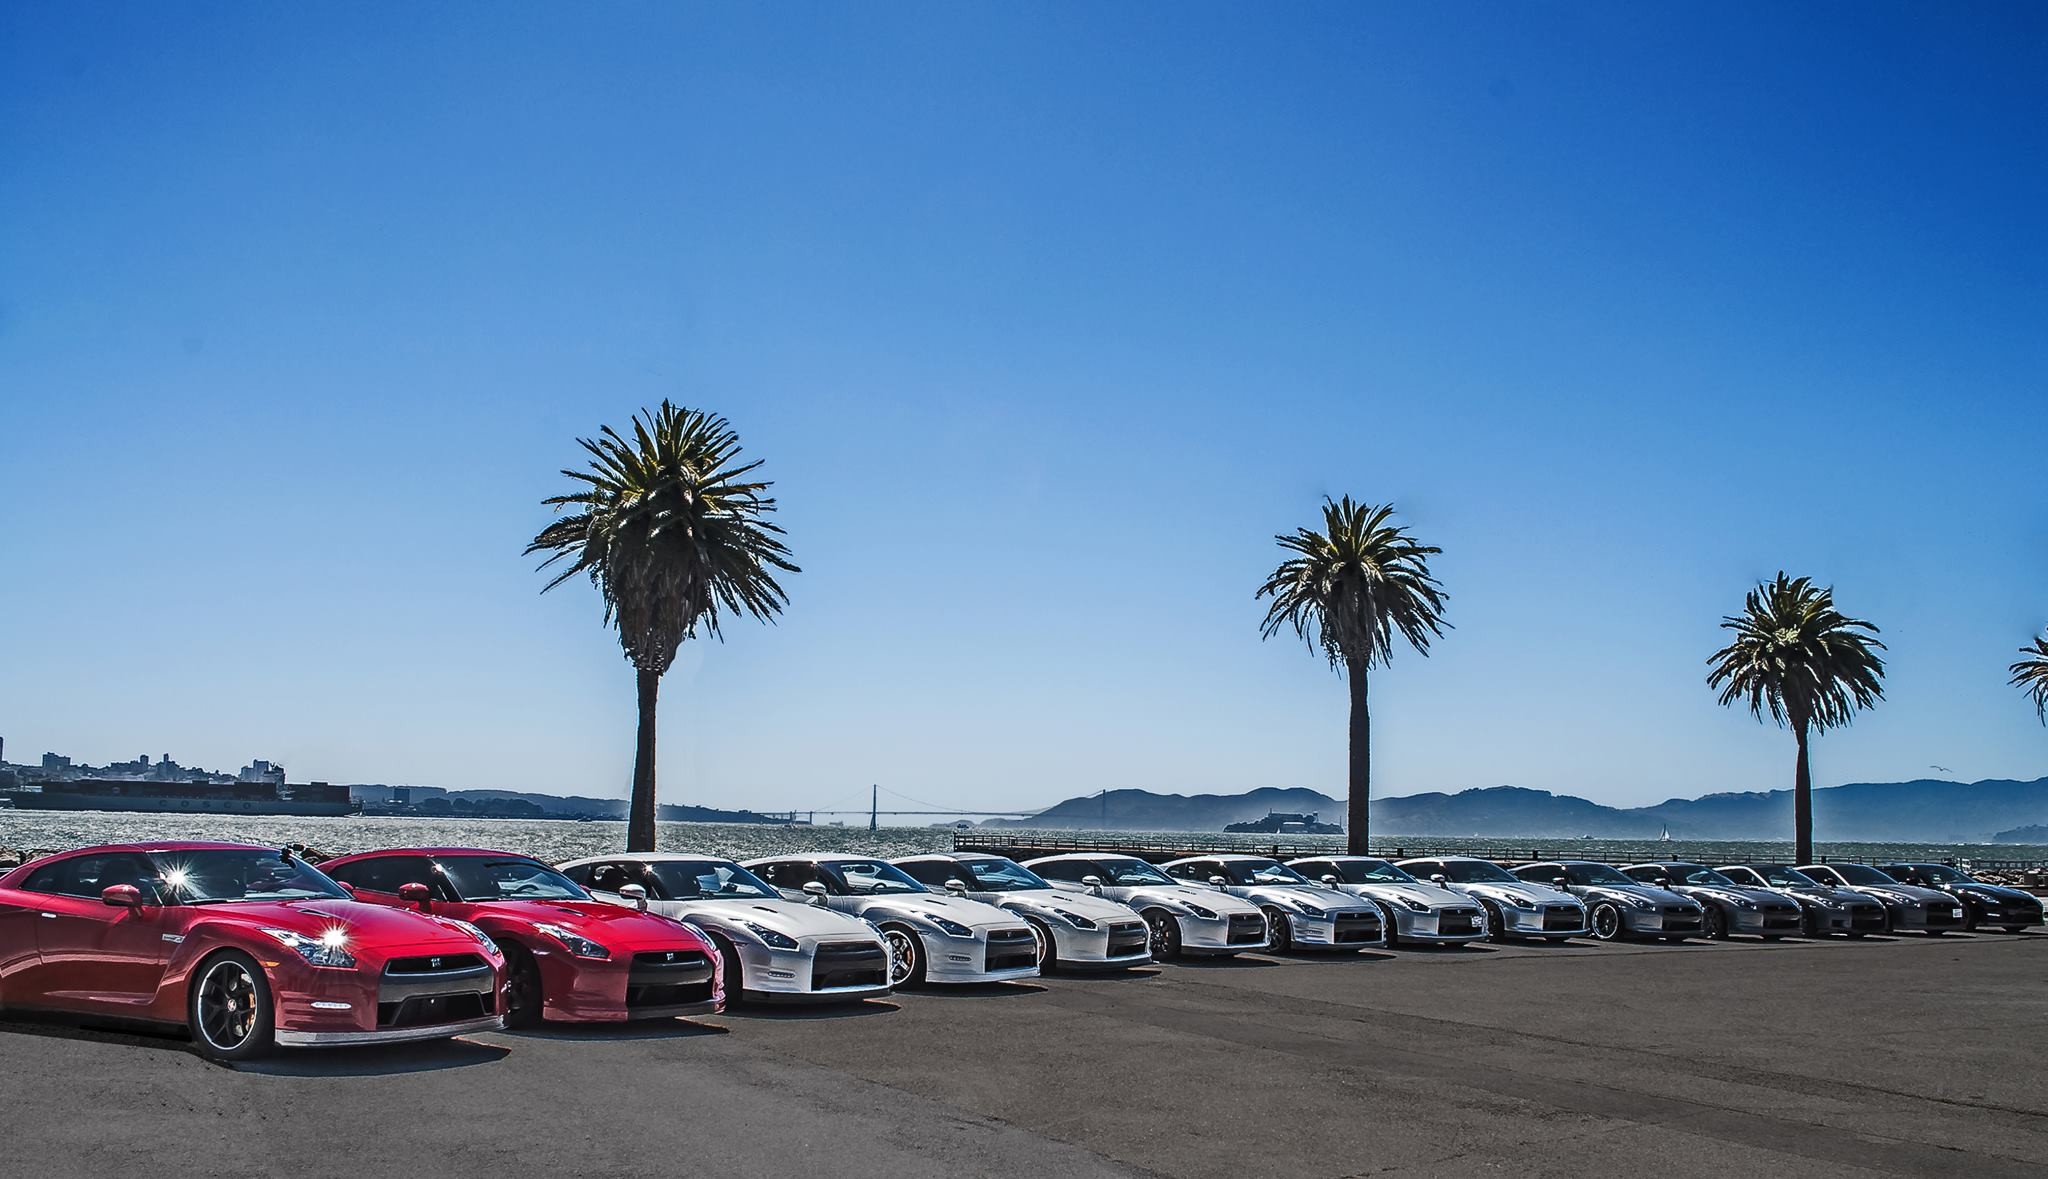 General 2048x1179 Nissan GT-R Nissan car palm trees red cars vehicle silver cars Japanese cars